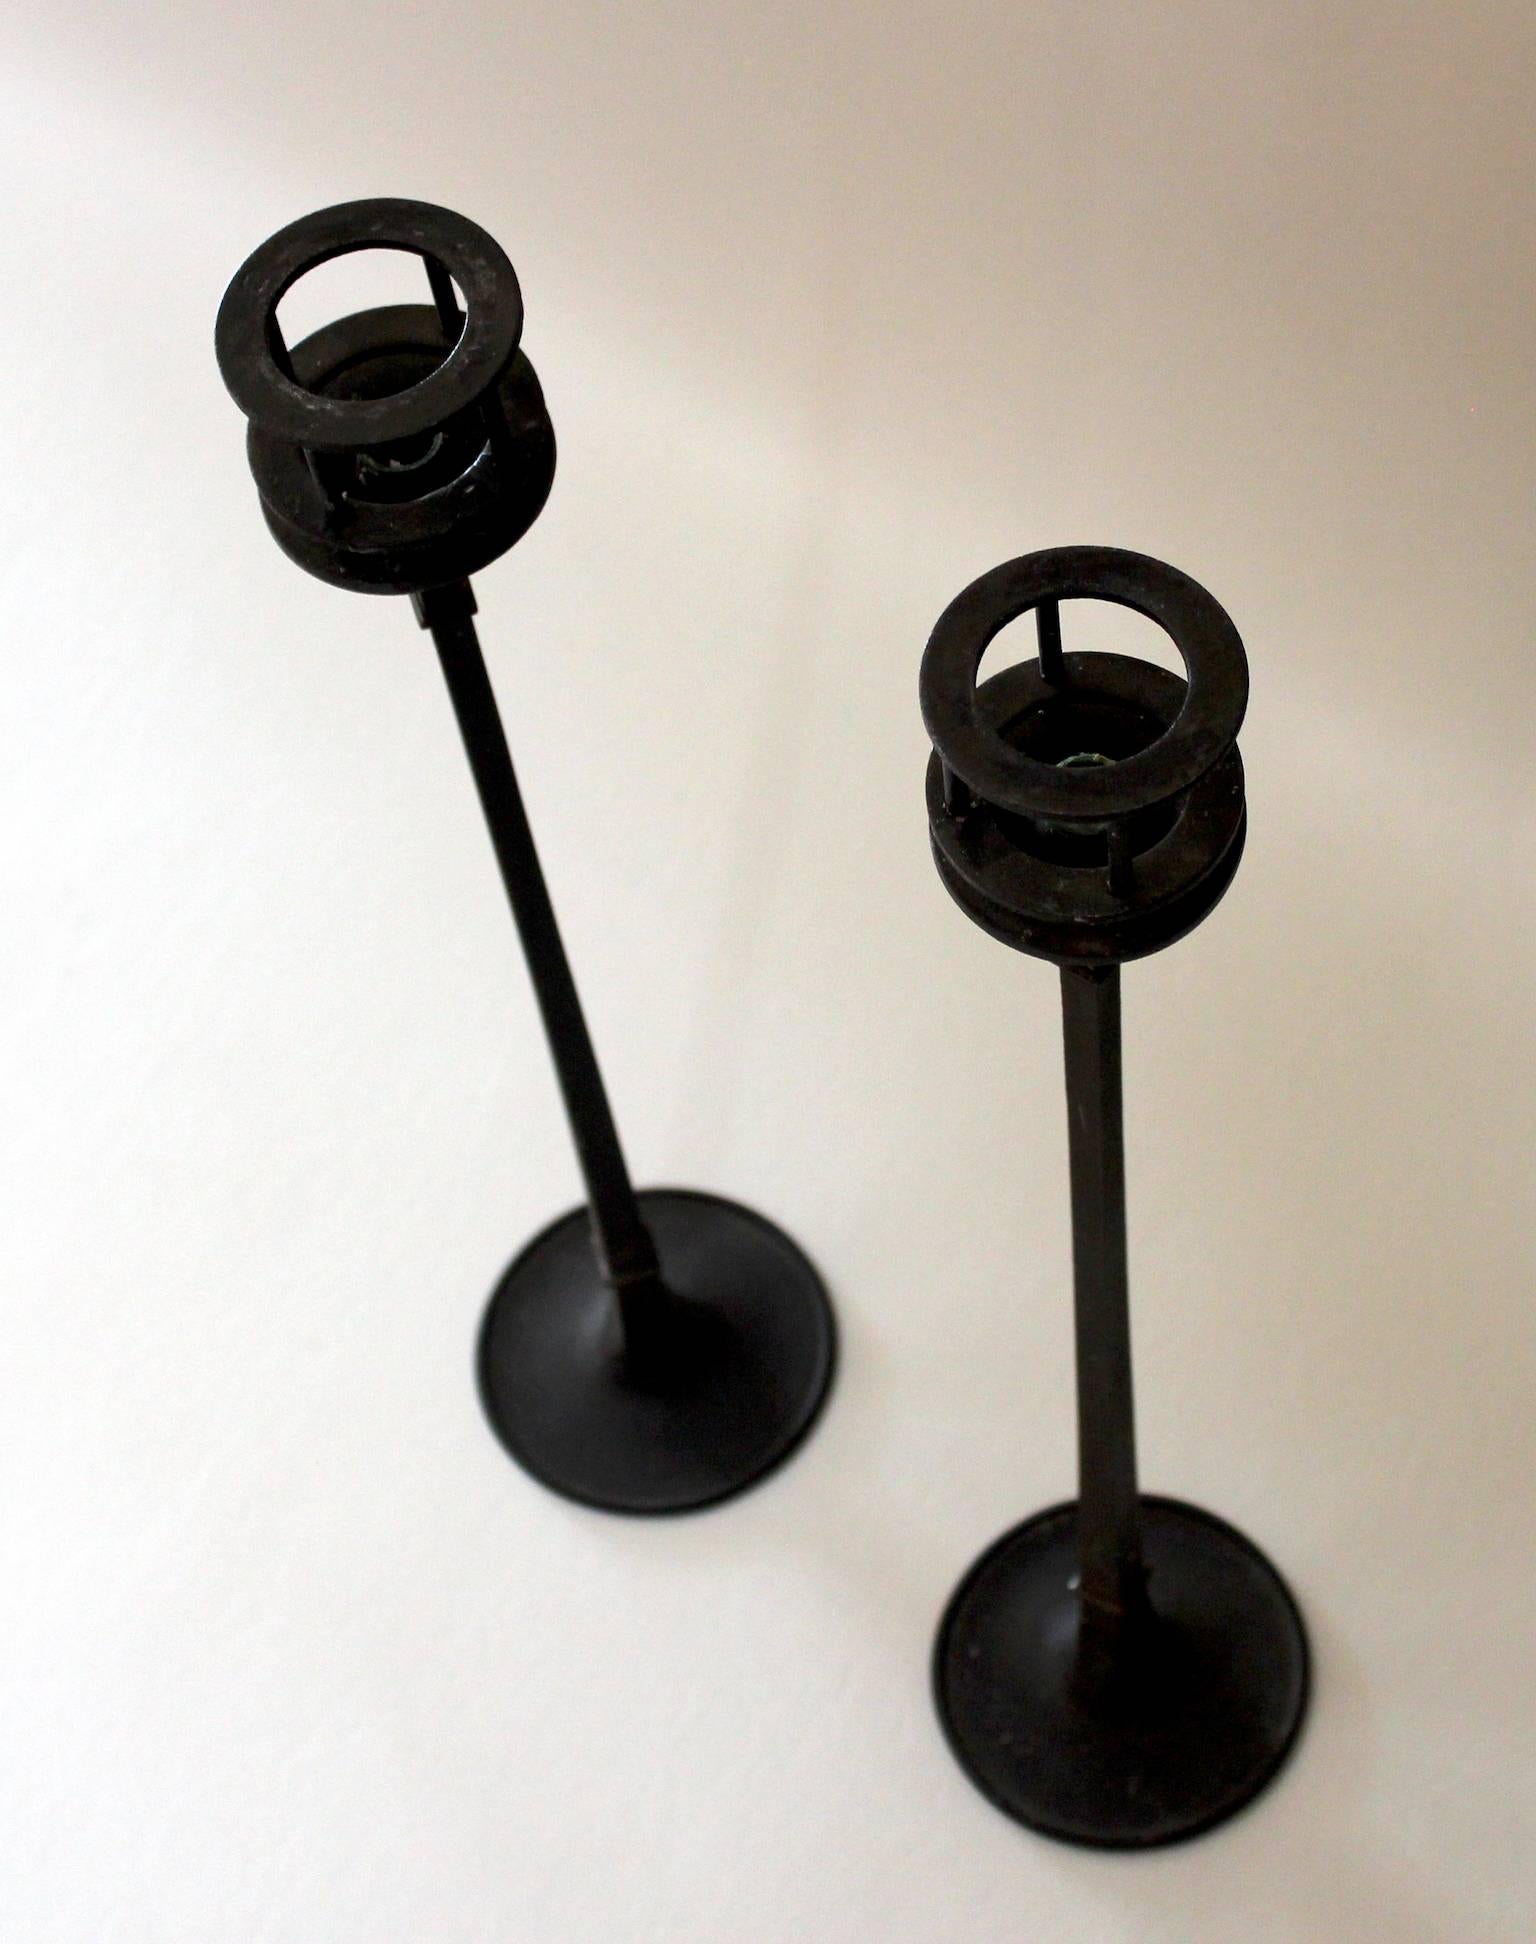 Pair of 1960s iron candlesticks designed by Jens Quistgaard for Dansk.